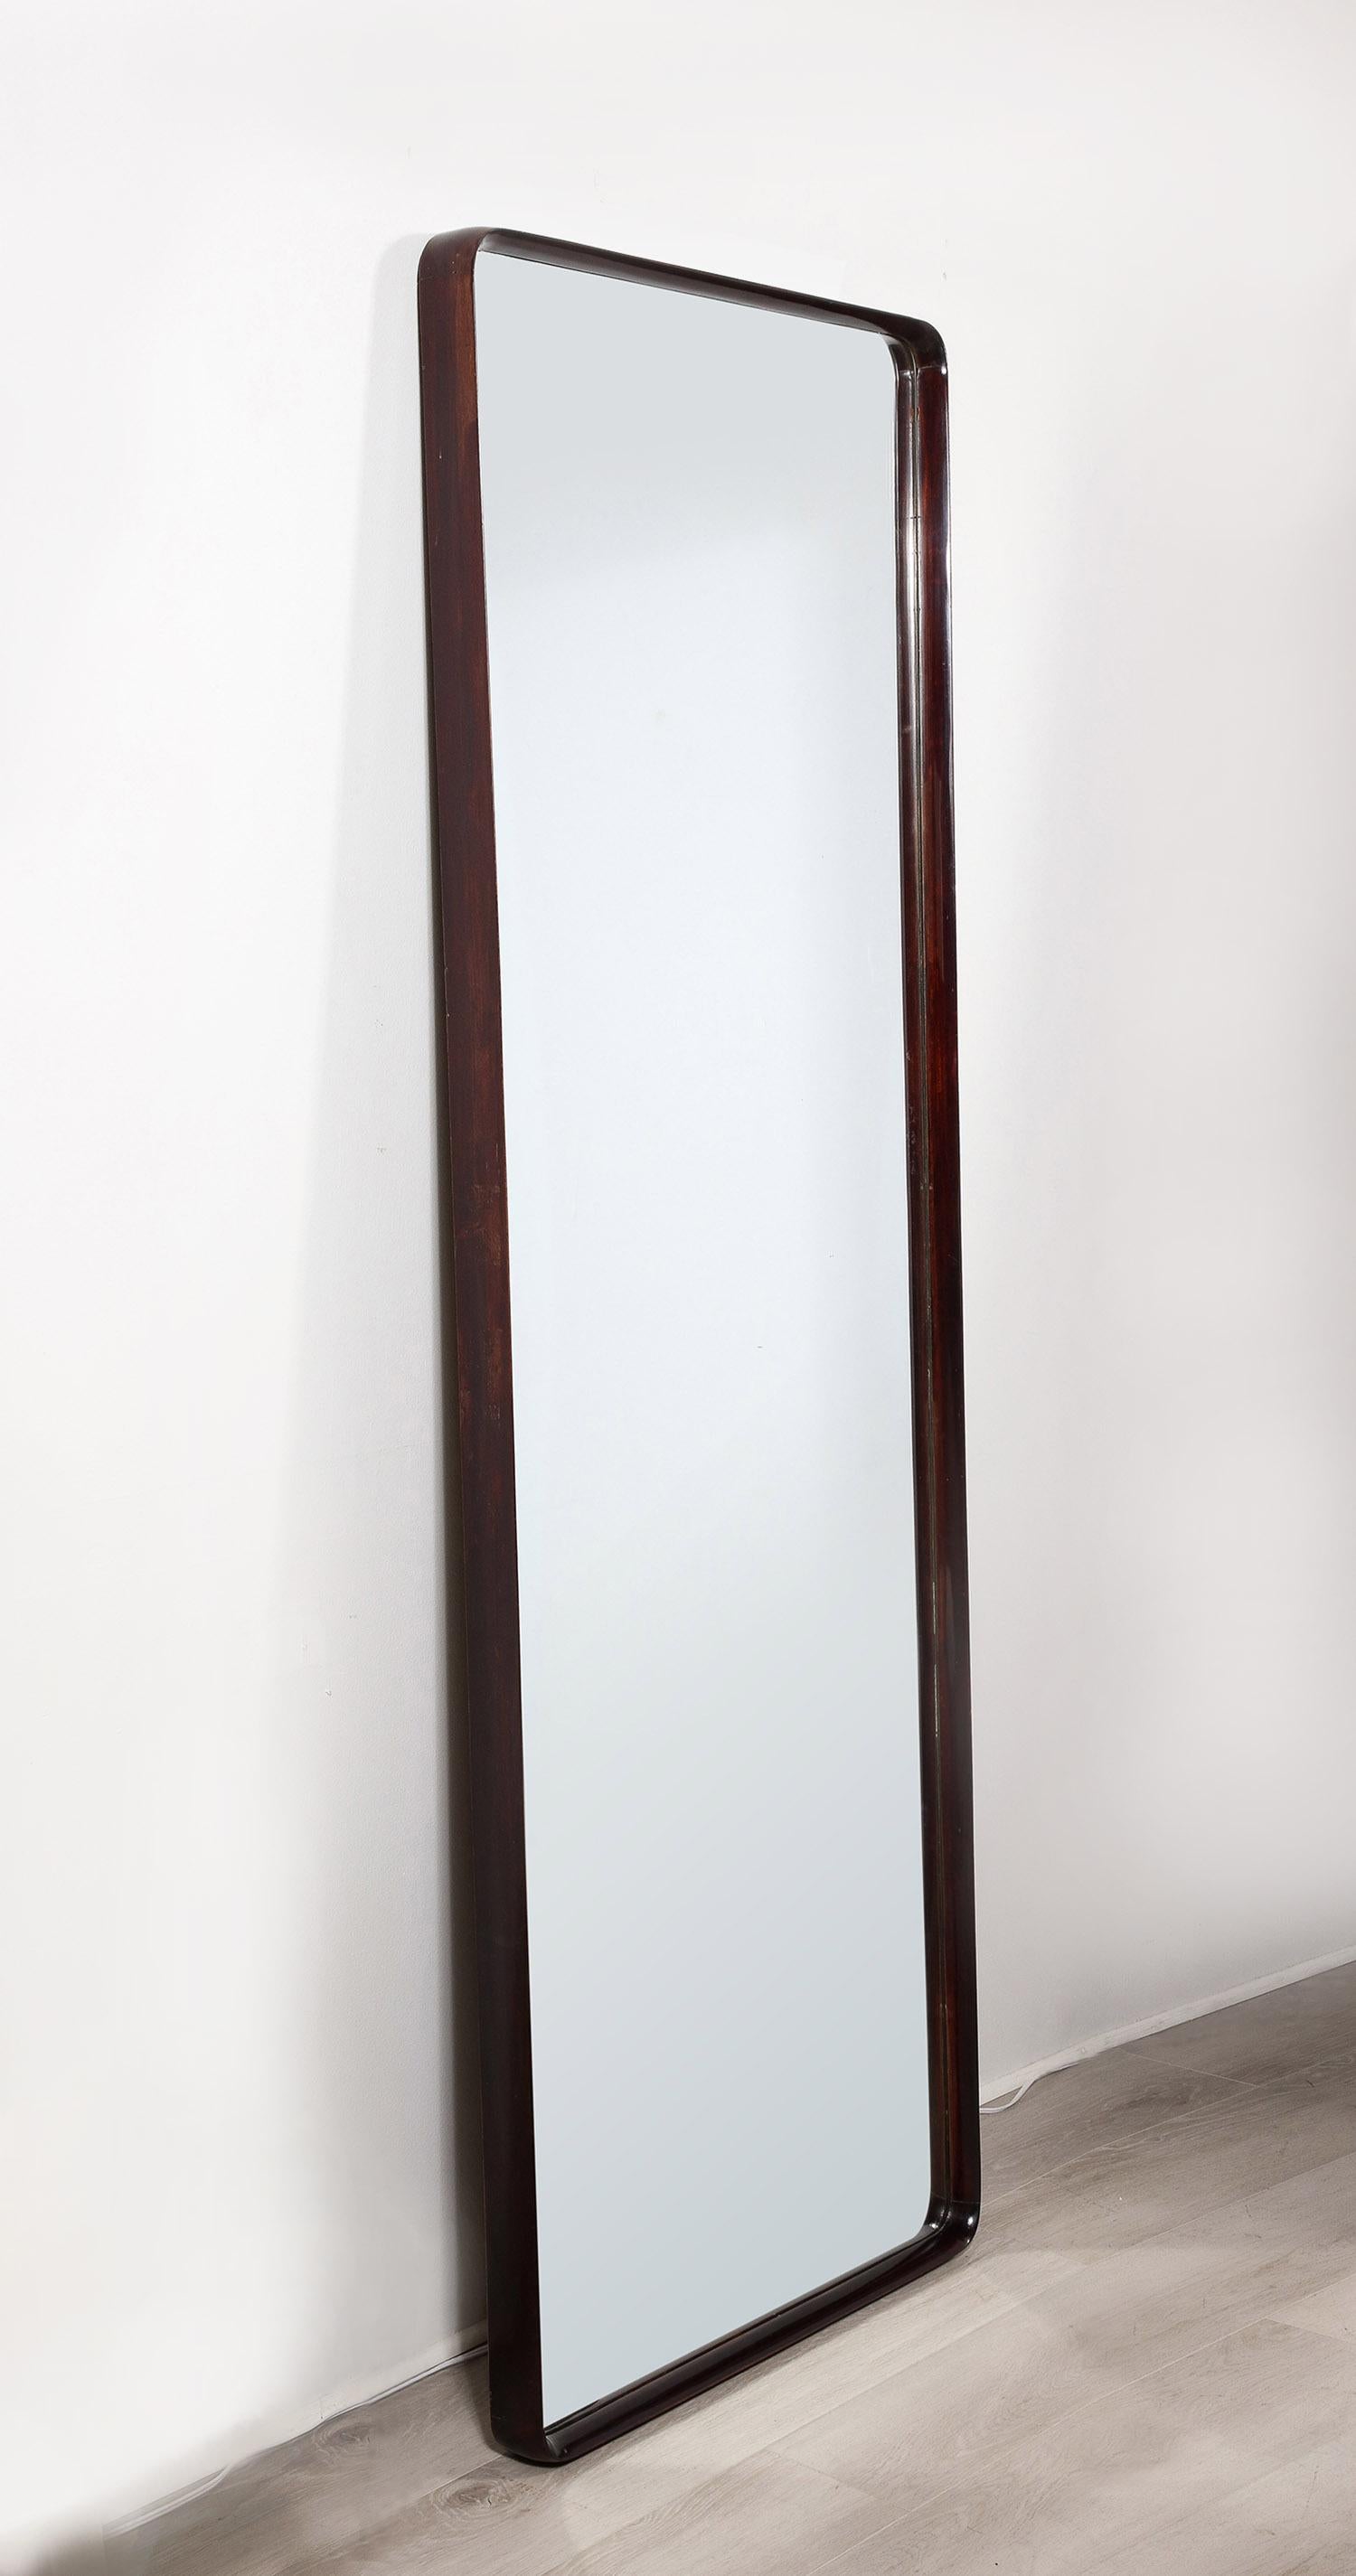 The mahogany mirror with curved edge. Can be shown vertically or horizontally